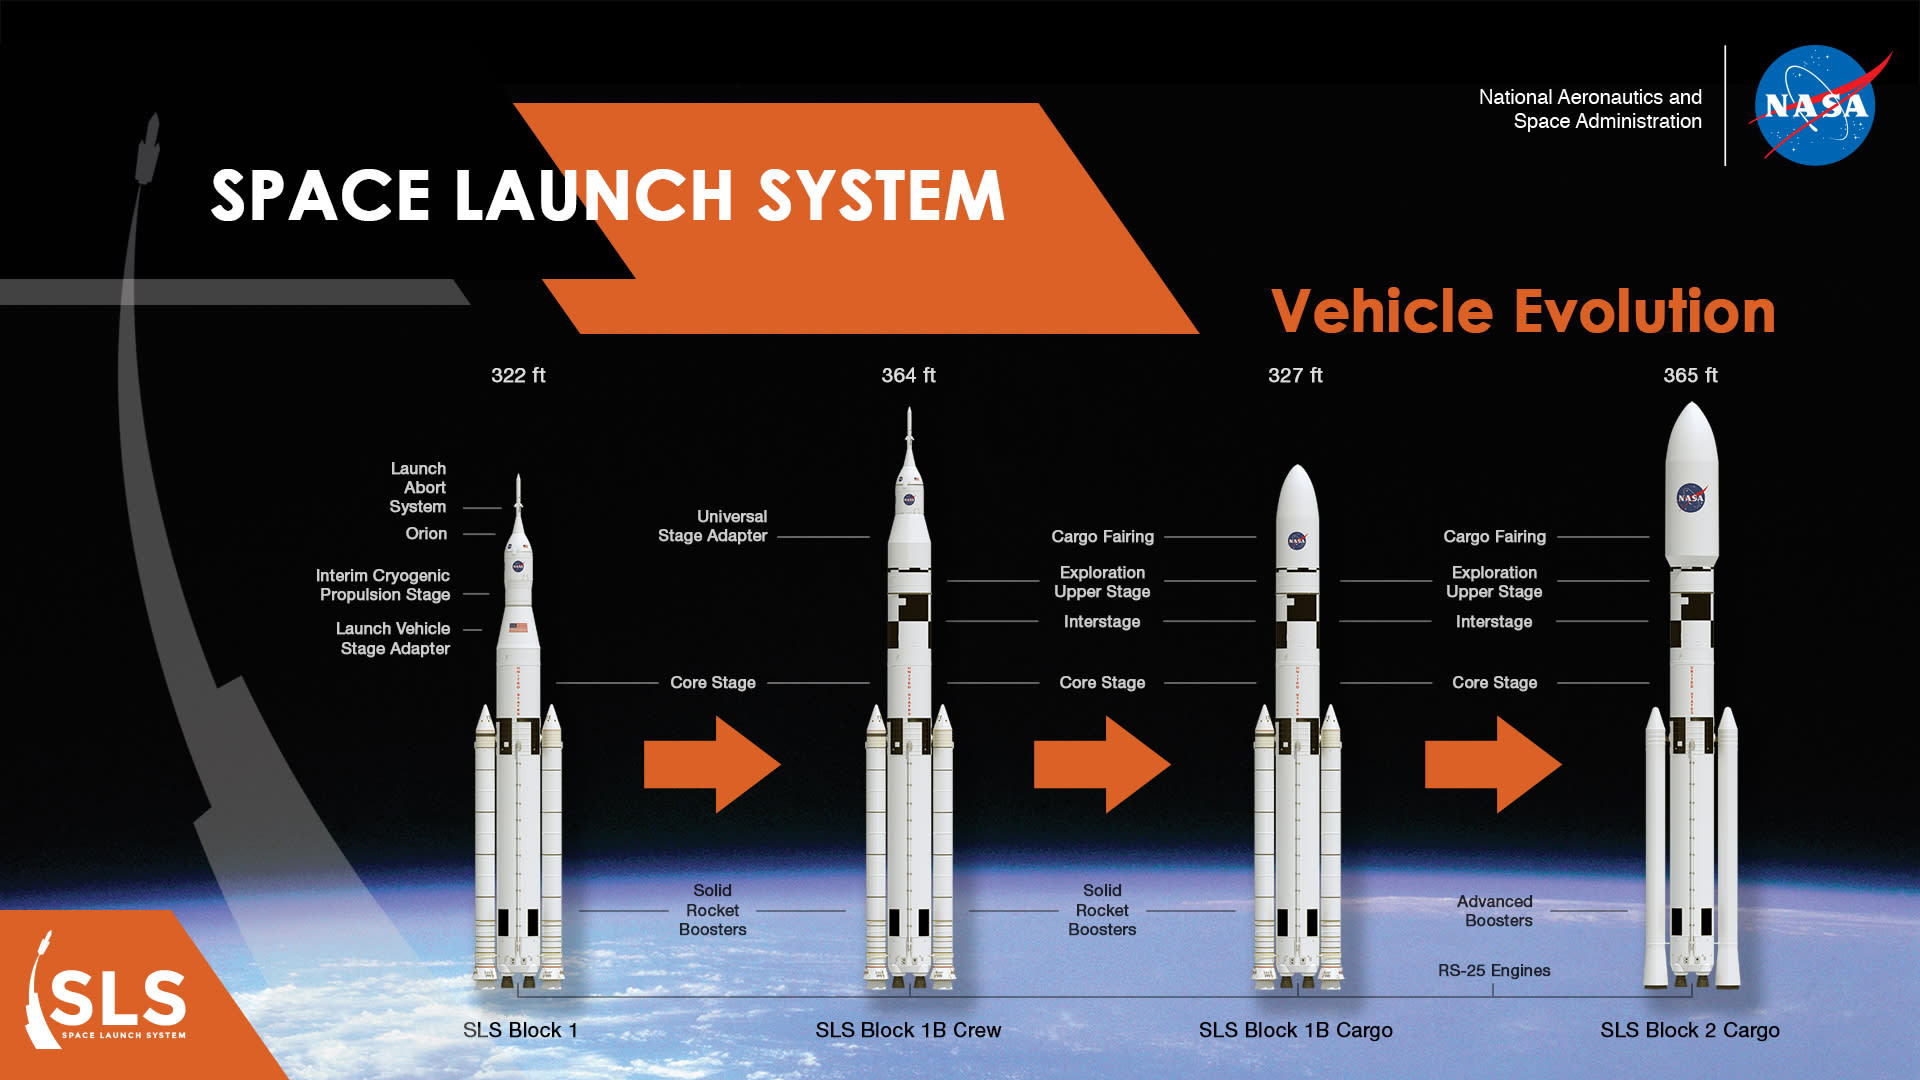 Space Launch System Evolution Courtesy of Marshall Space Flight Center in Huntsville, Alabama